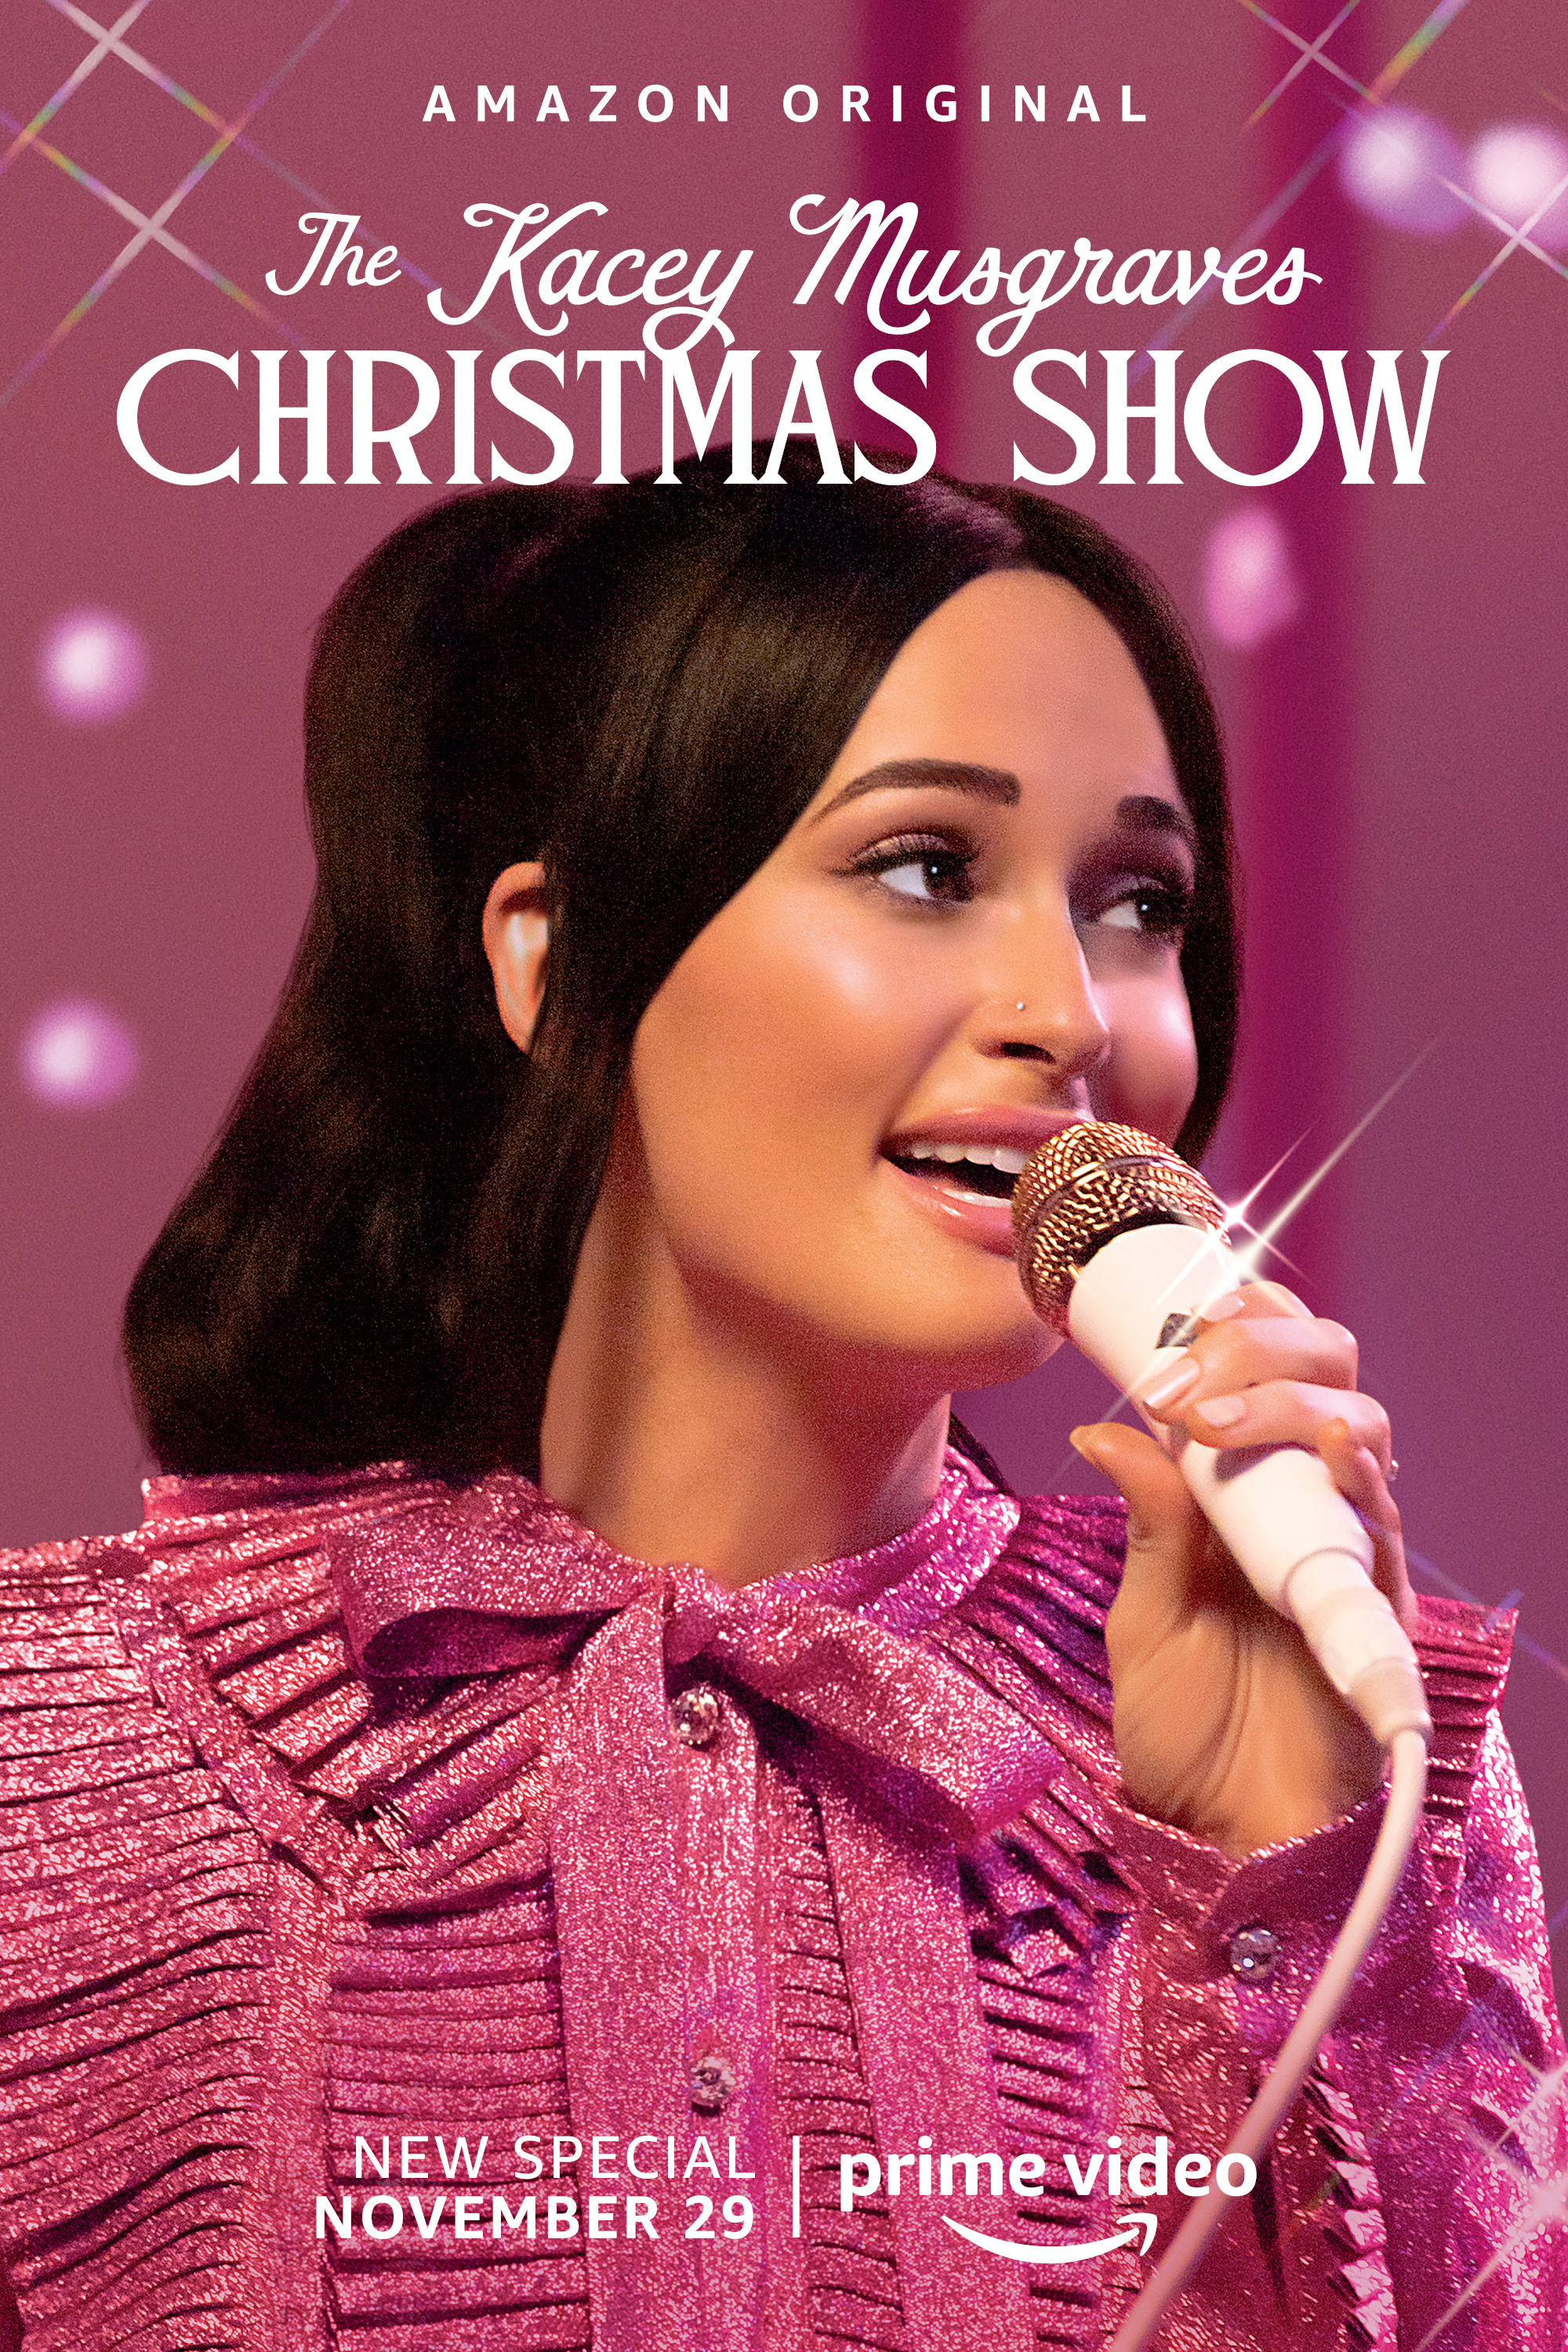 Mega Sized TV Poster Image for The Kacey Musgraves Christmas Show 